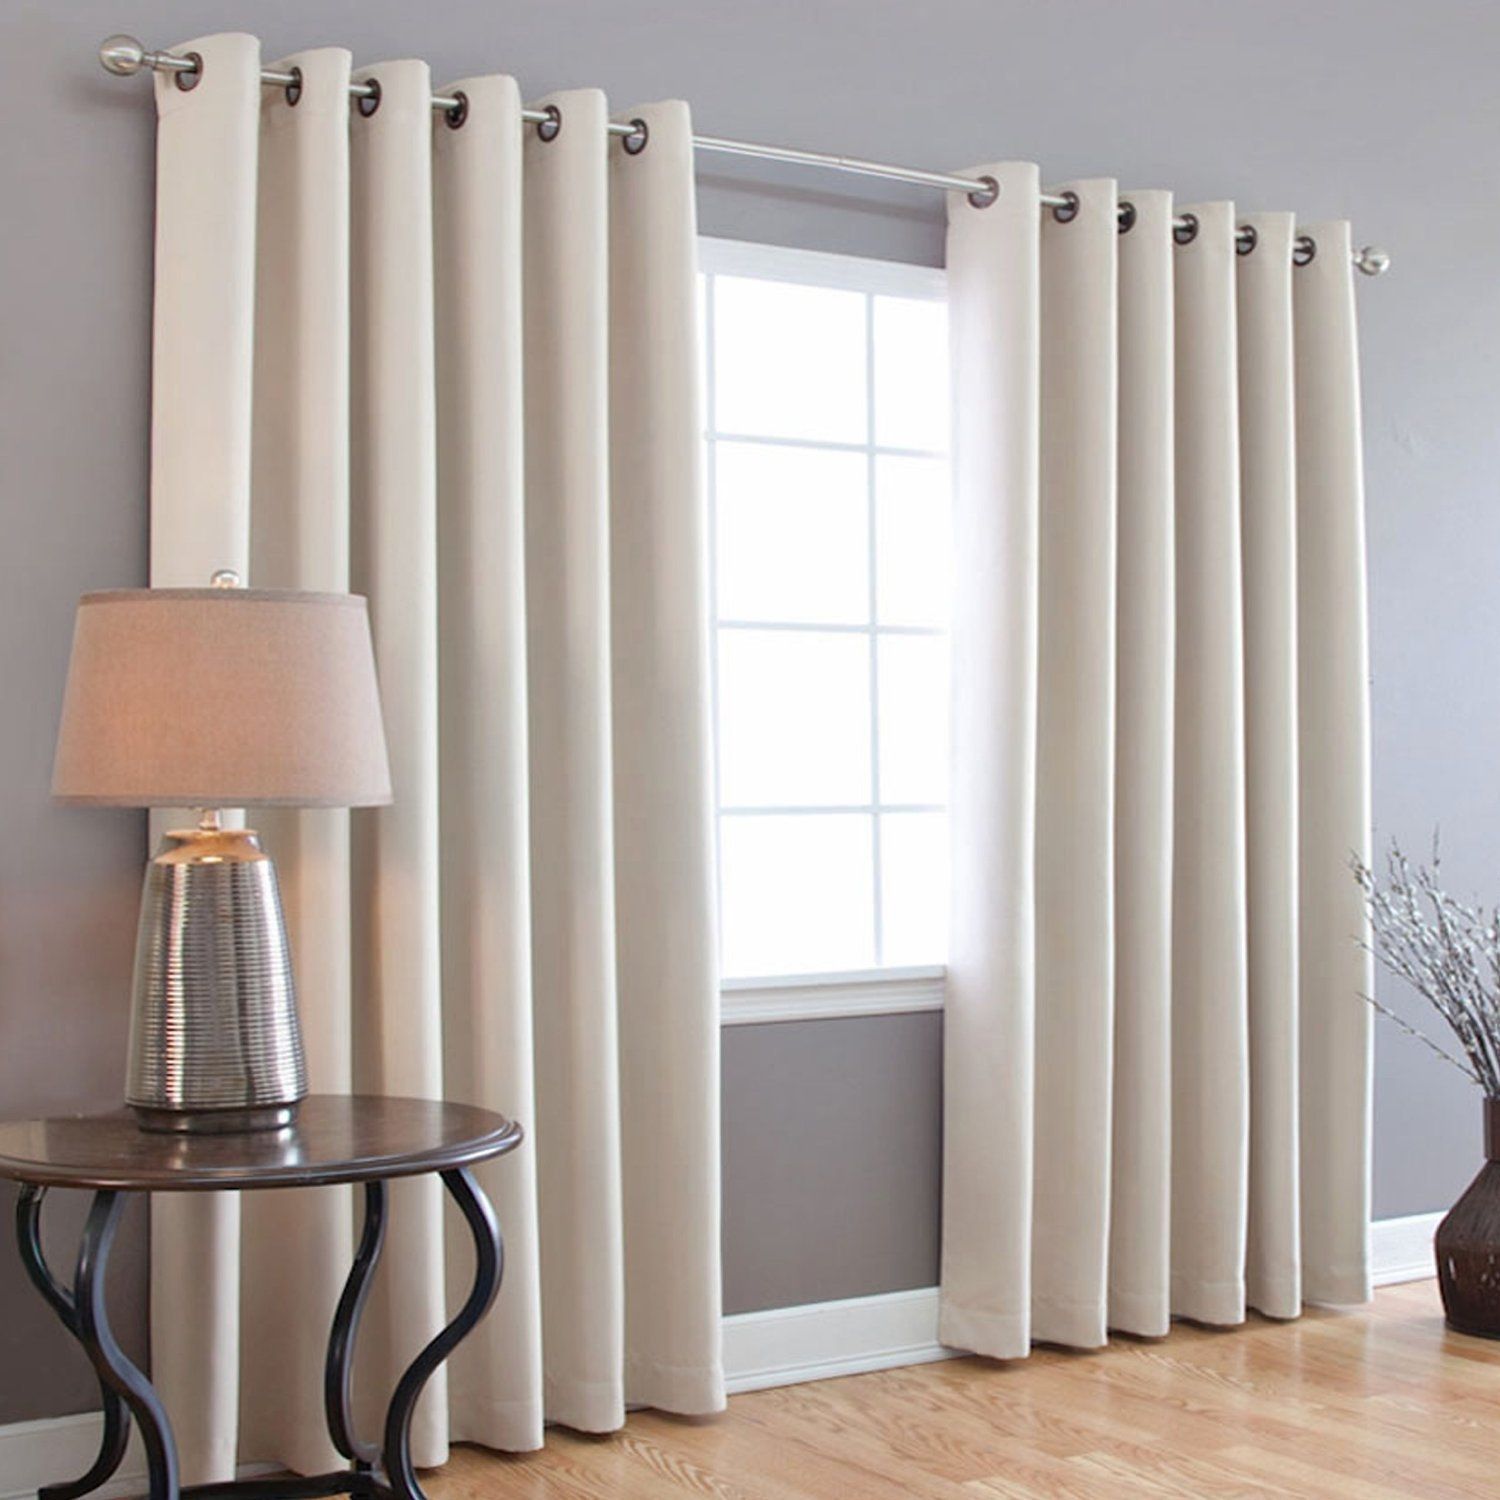 15 Collection of Hotel Quality Blackout Curtains | Curtain Ideas